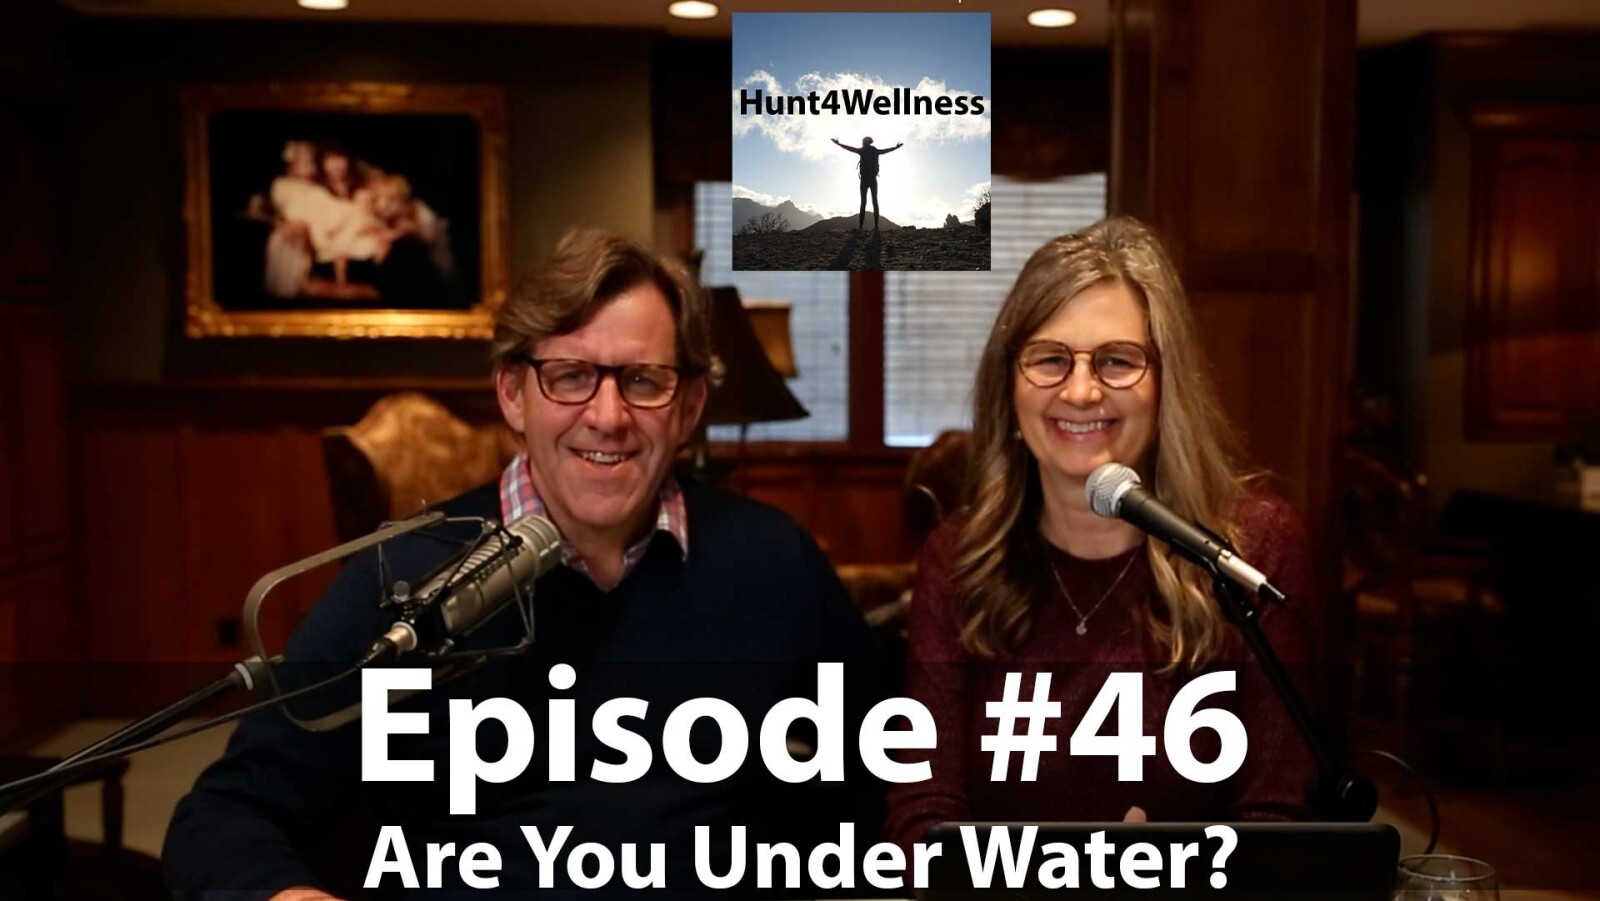 Episode #46 - Are You Under Water?